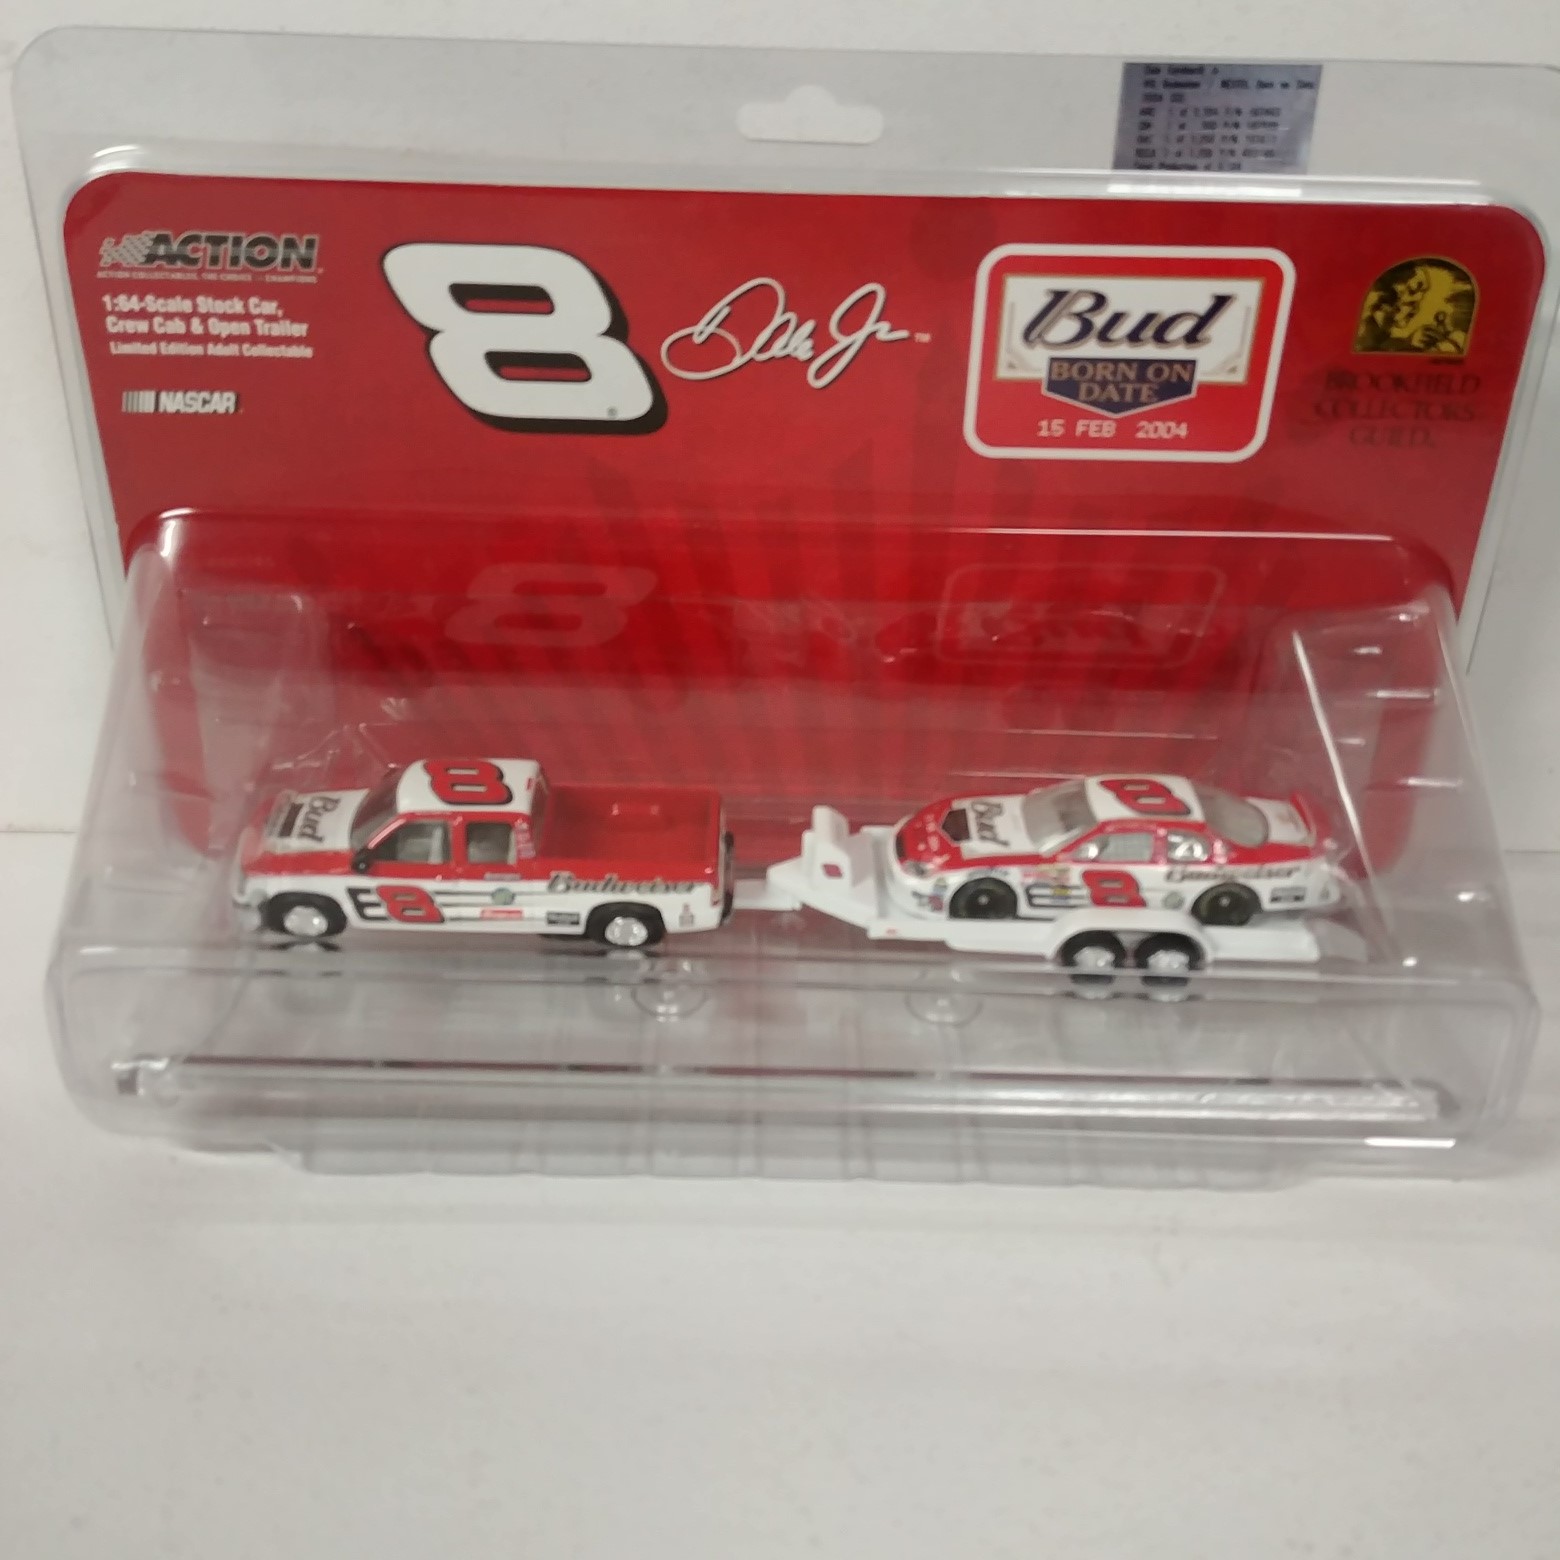 2004 Dale Earnhardt Jr 1/64th Budweiser "2/15/04 Born On Date" CCC 3-piece set by Brookfield